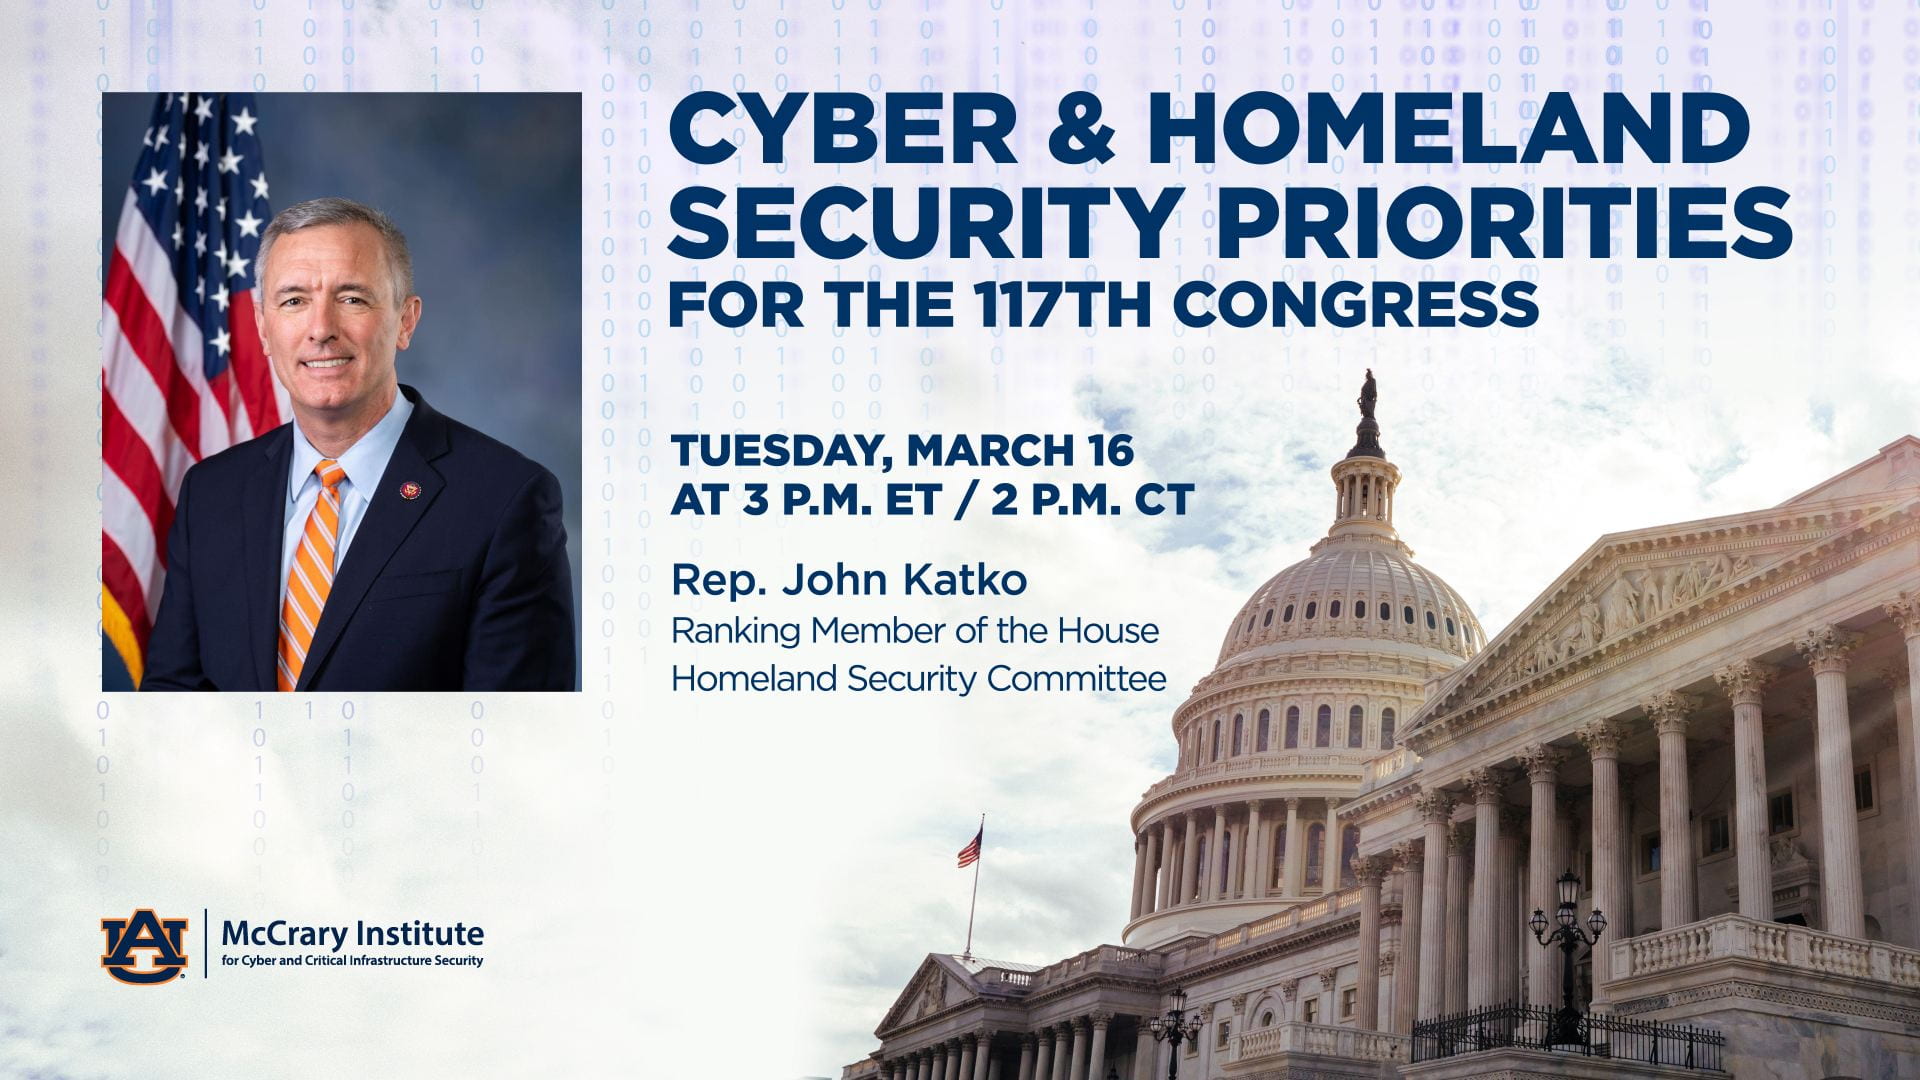 Cyber & Homeland Security Priorities for the 117th Congress